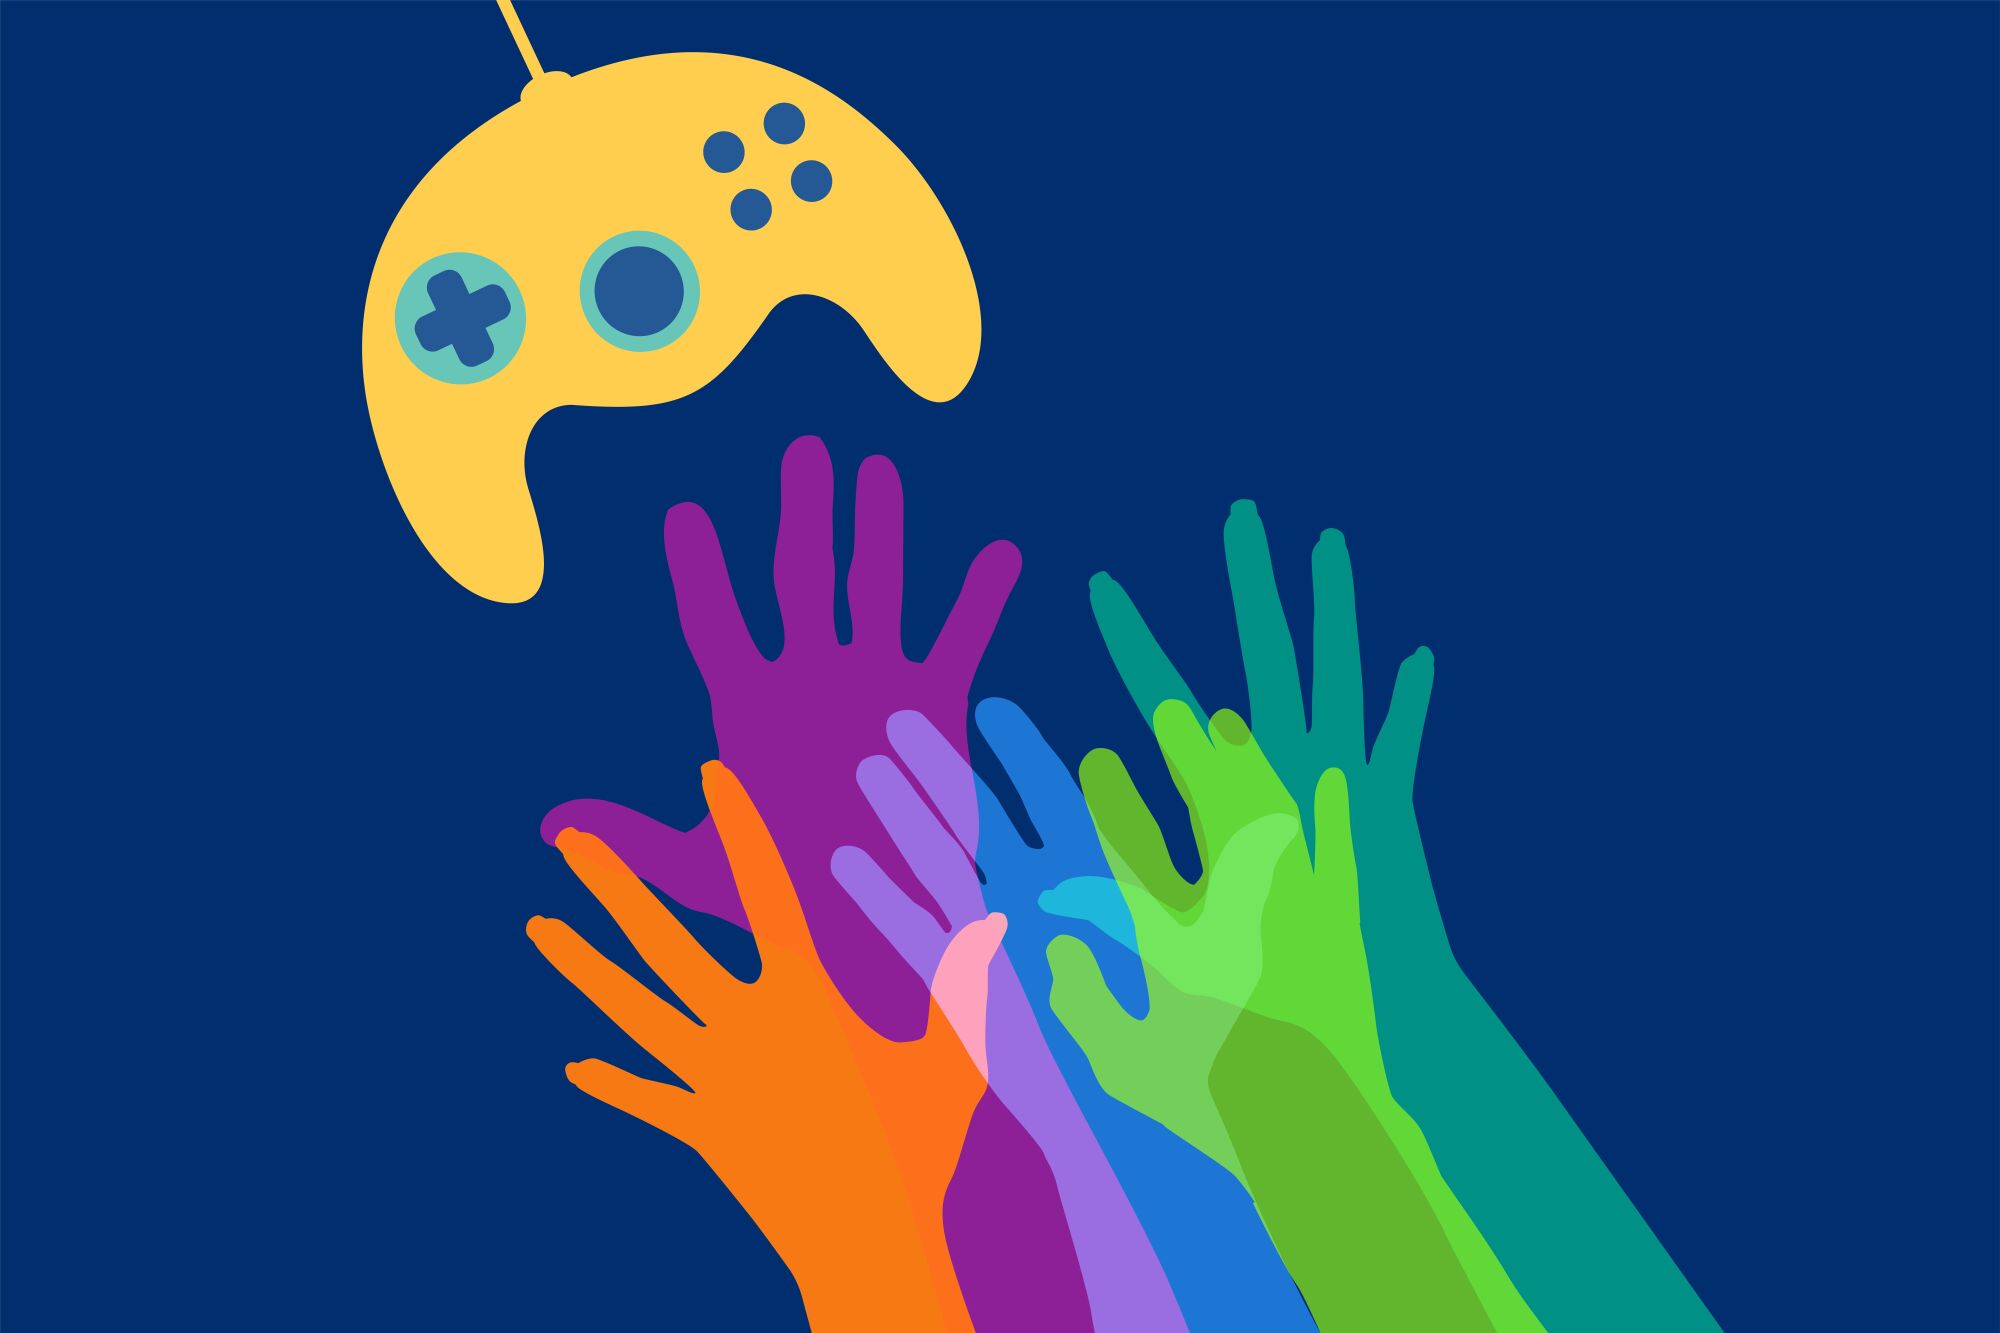 Illustration of hands reaching for a video game controller